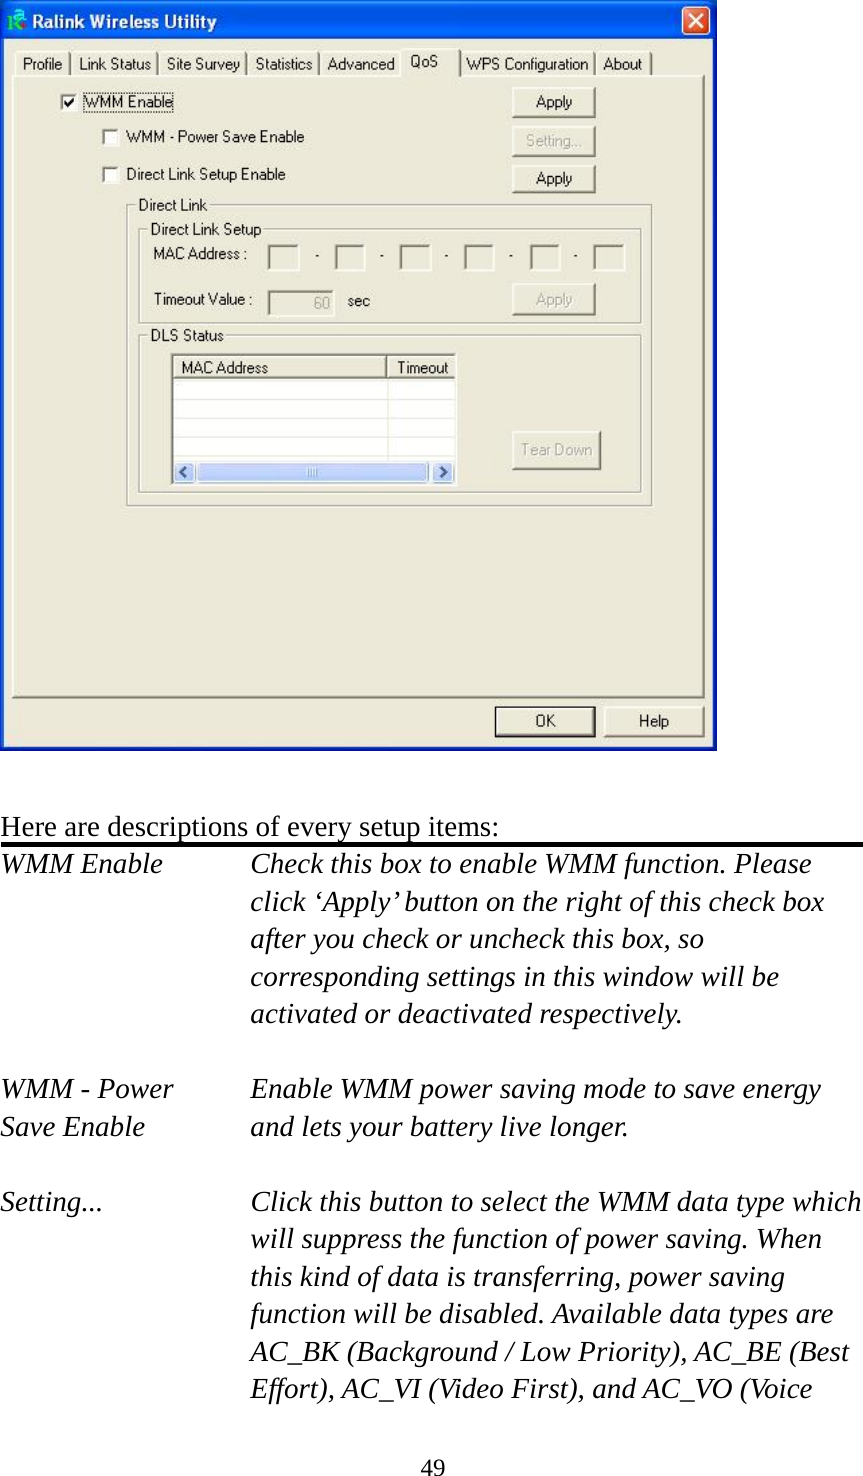  49  Here are descriptions of every setup items: WMM Enable  Check this box to enable WMM function. Please click ‘Apply’ button on the right of this check box after you check or uncheck this box, so corresponding settings in this window will be activated or deactivated respectively.  WMM - Power  Enable WMM power saving mode to save energy Save Enable  and lets your battery live longer.  Setting...  Click this button to select the WMM data type which will suppress the function of power saving. When this kind of data is transferring, power saving function will be disabled. Available data types are AC_BK (Background / Low Priority), AC_BE (Best Effort), AC_VI (Video First), and AC_VO (Voice 